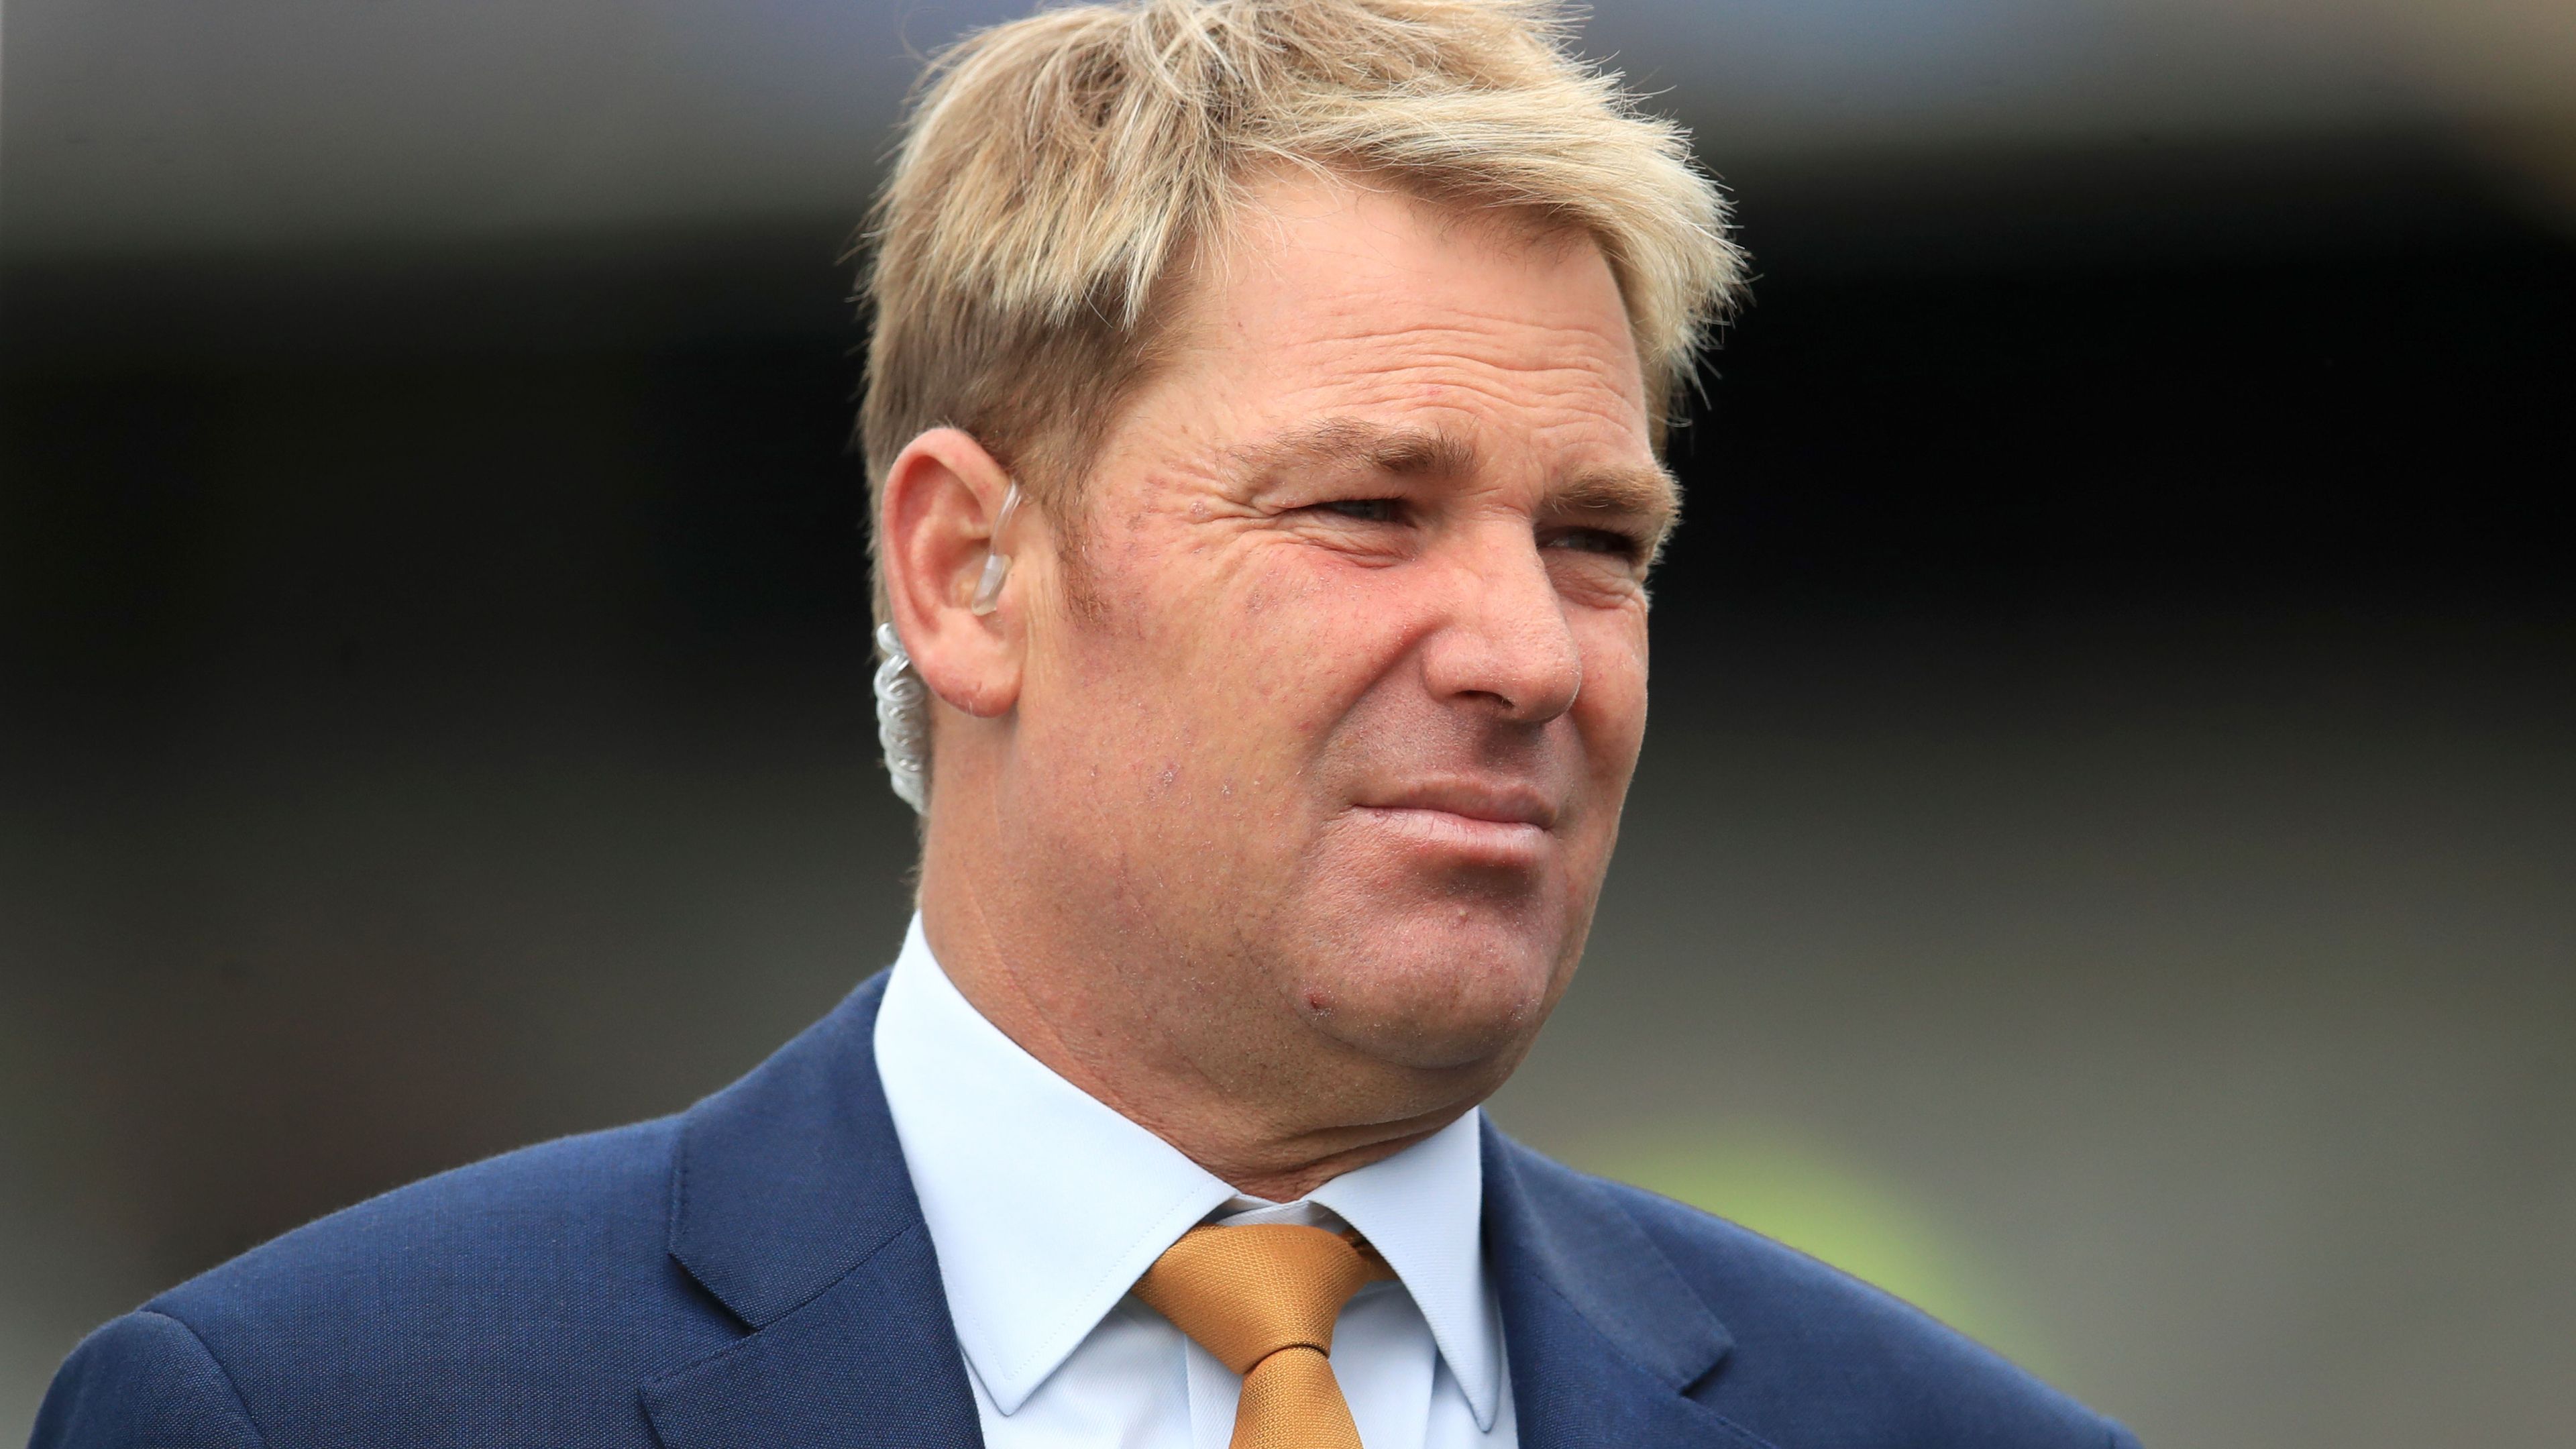 Shane Warne picks Riley Meredith, Marcus Stoinis in his Australia T20 team to play England